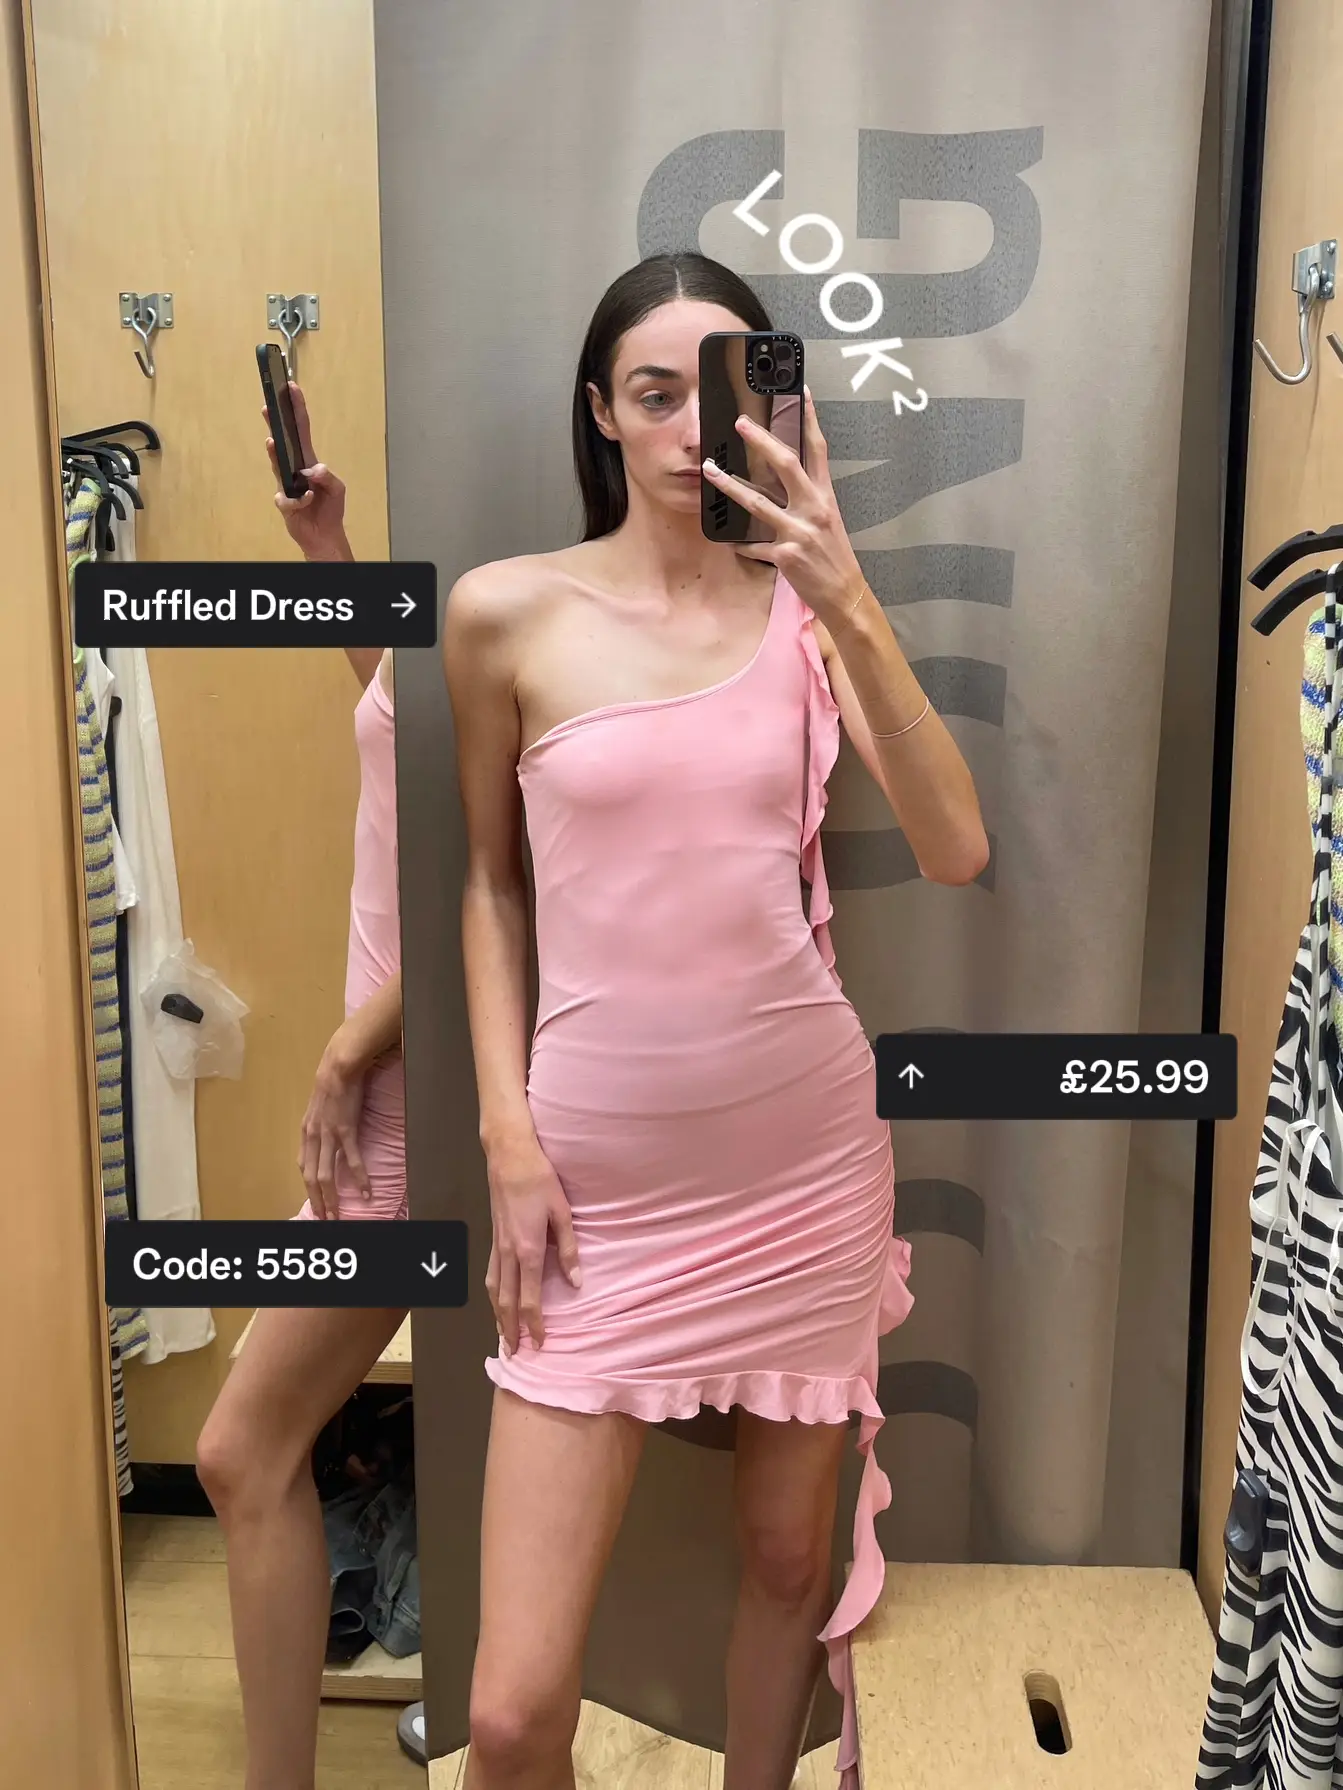 Bershka Dresses Try On 📚✨, Gallery posted by Millicentrose